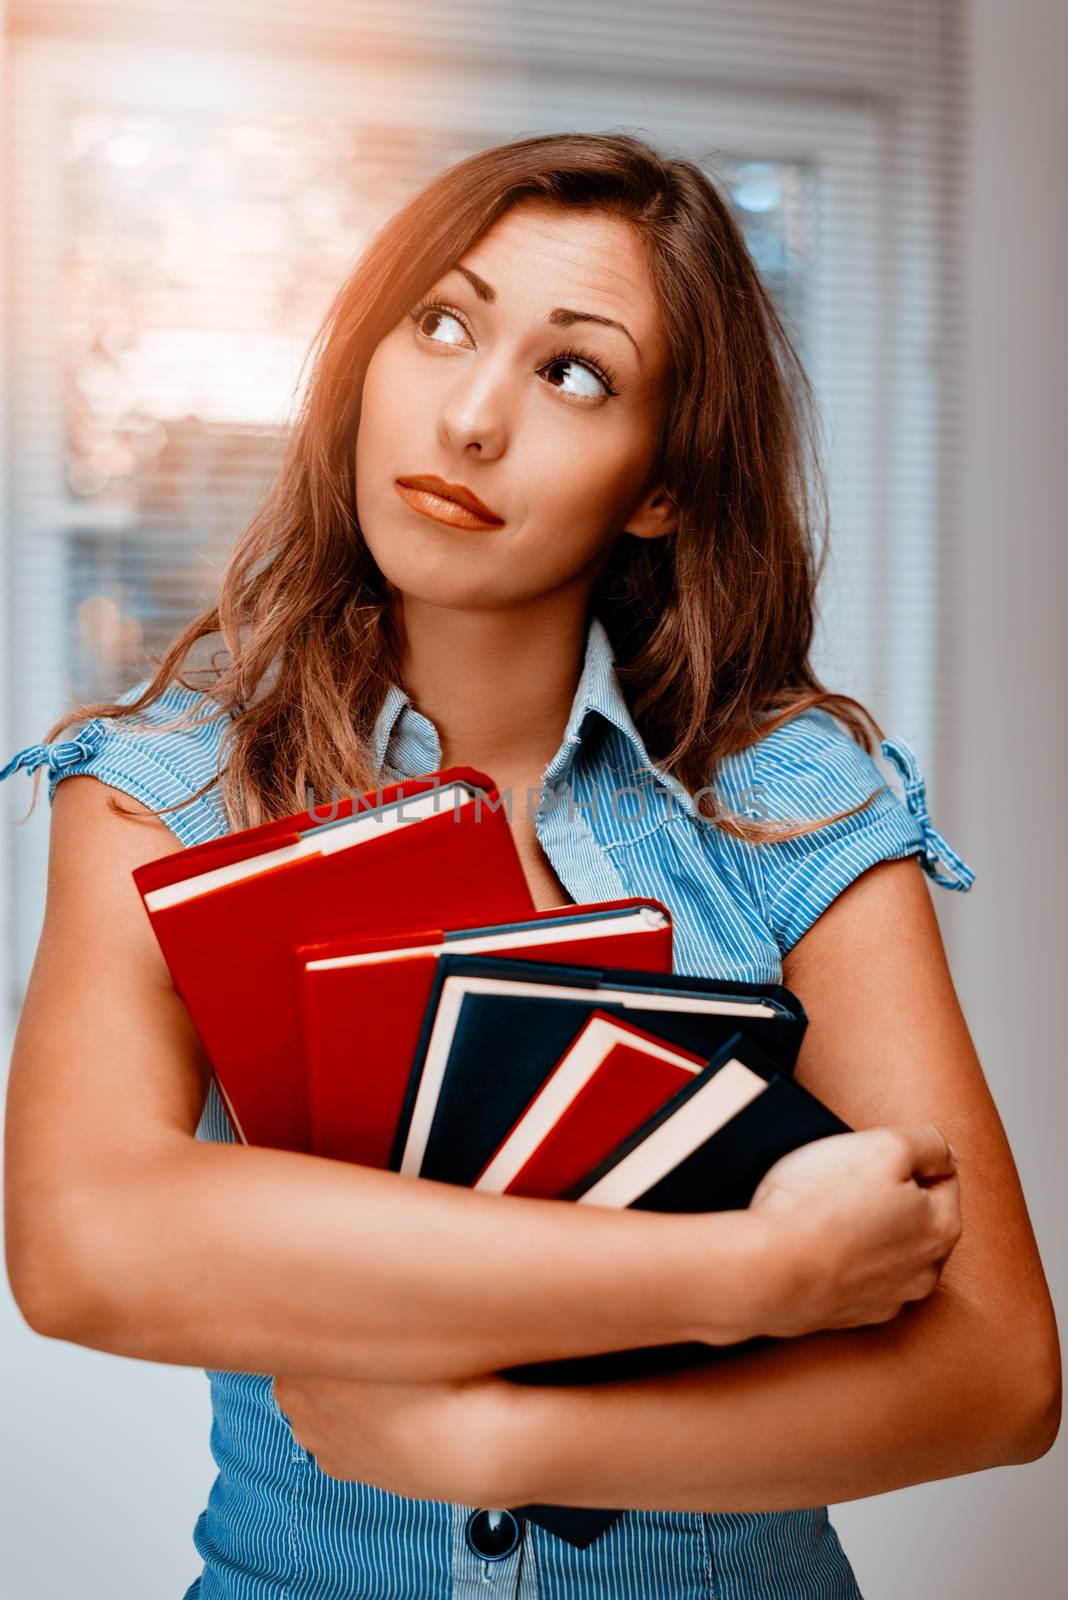 Beautiful teenage girl standing and holding colorful books.